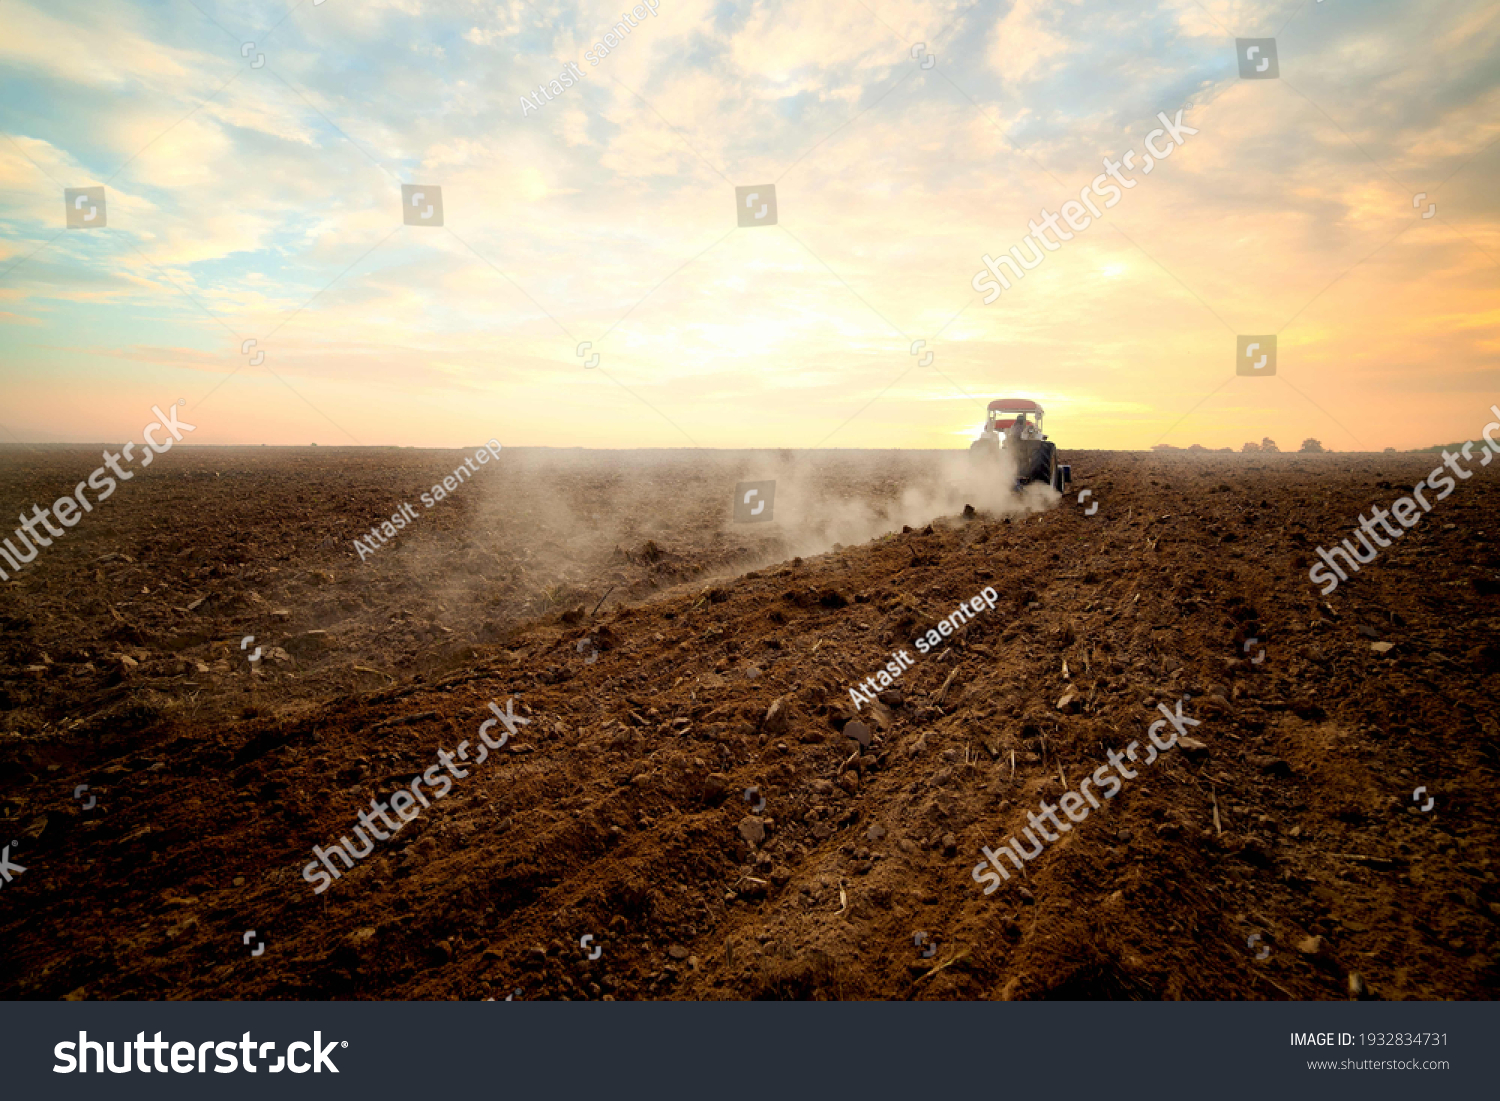 Agriculture use tractor plowing land field in the backround. Cultivated field. Agronomy, farming, husbandry .Tractor working on farm at sunset,modern agricultural transport,farmer working in the field #1932834731